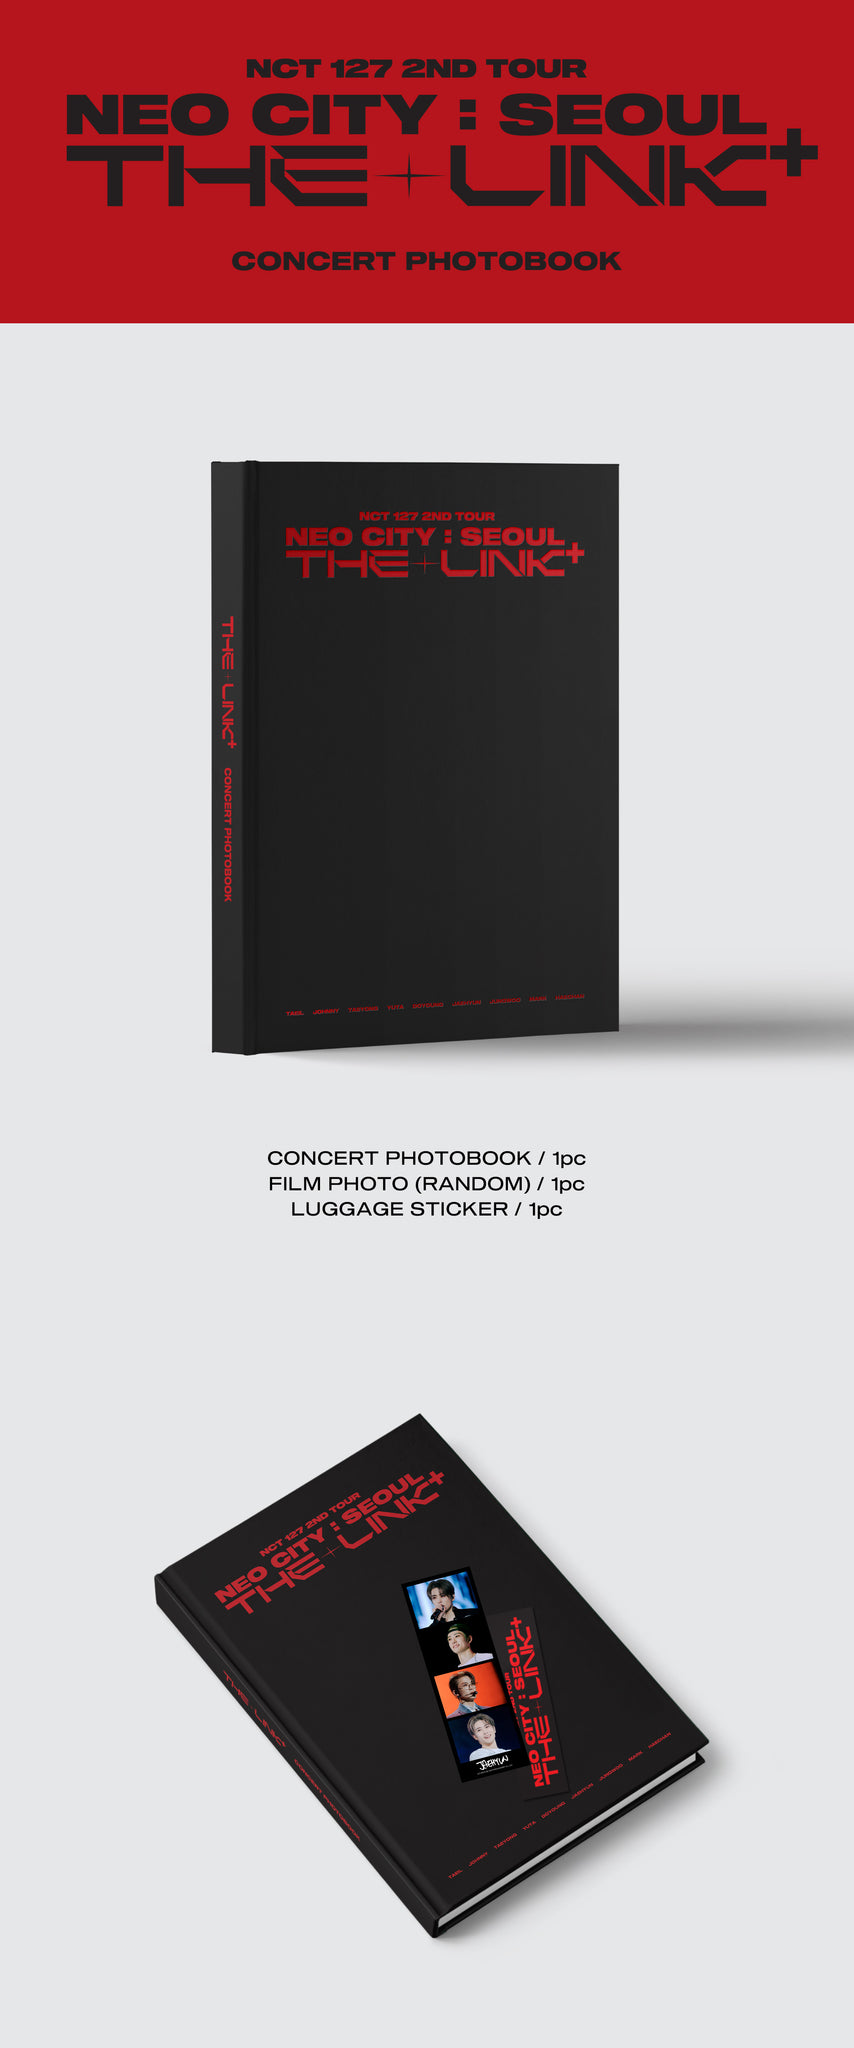 NCT 127 – CONCERT PHOTO BOOK_2nd CON